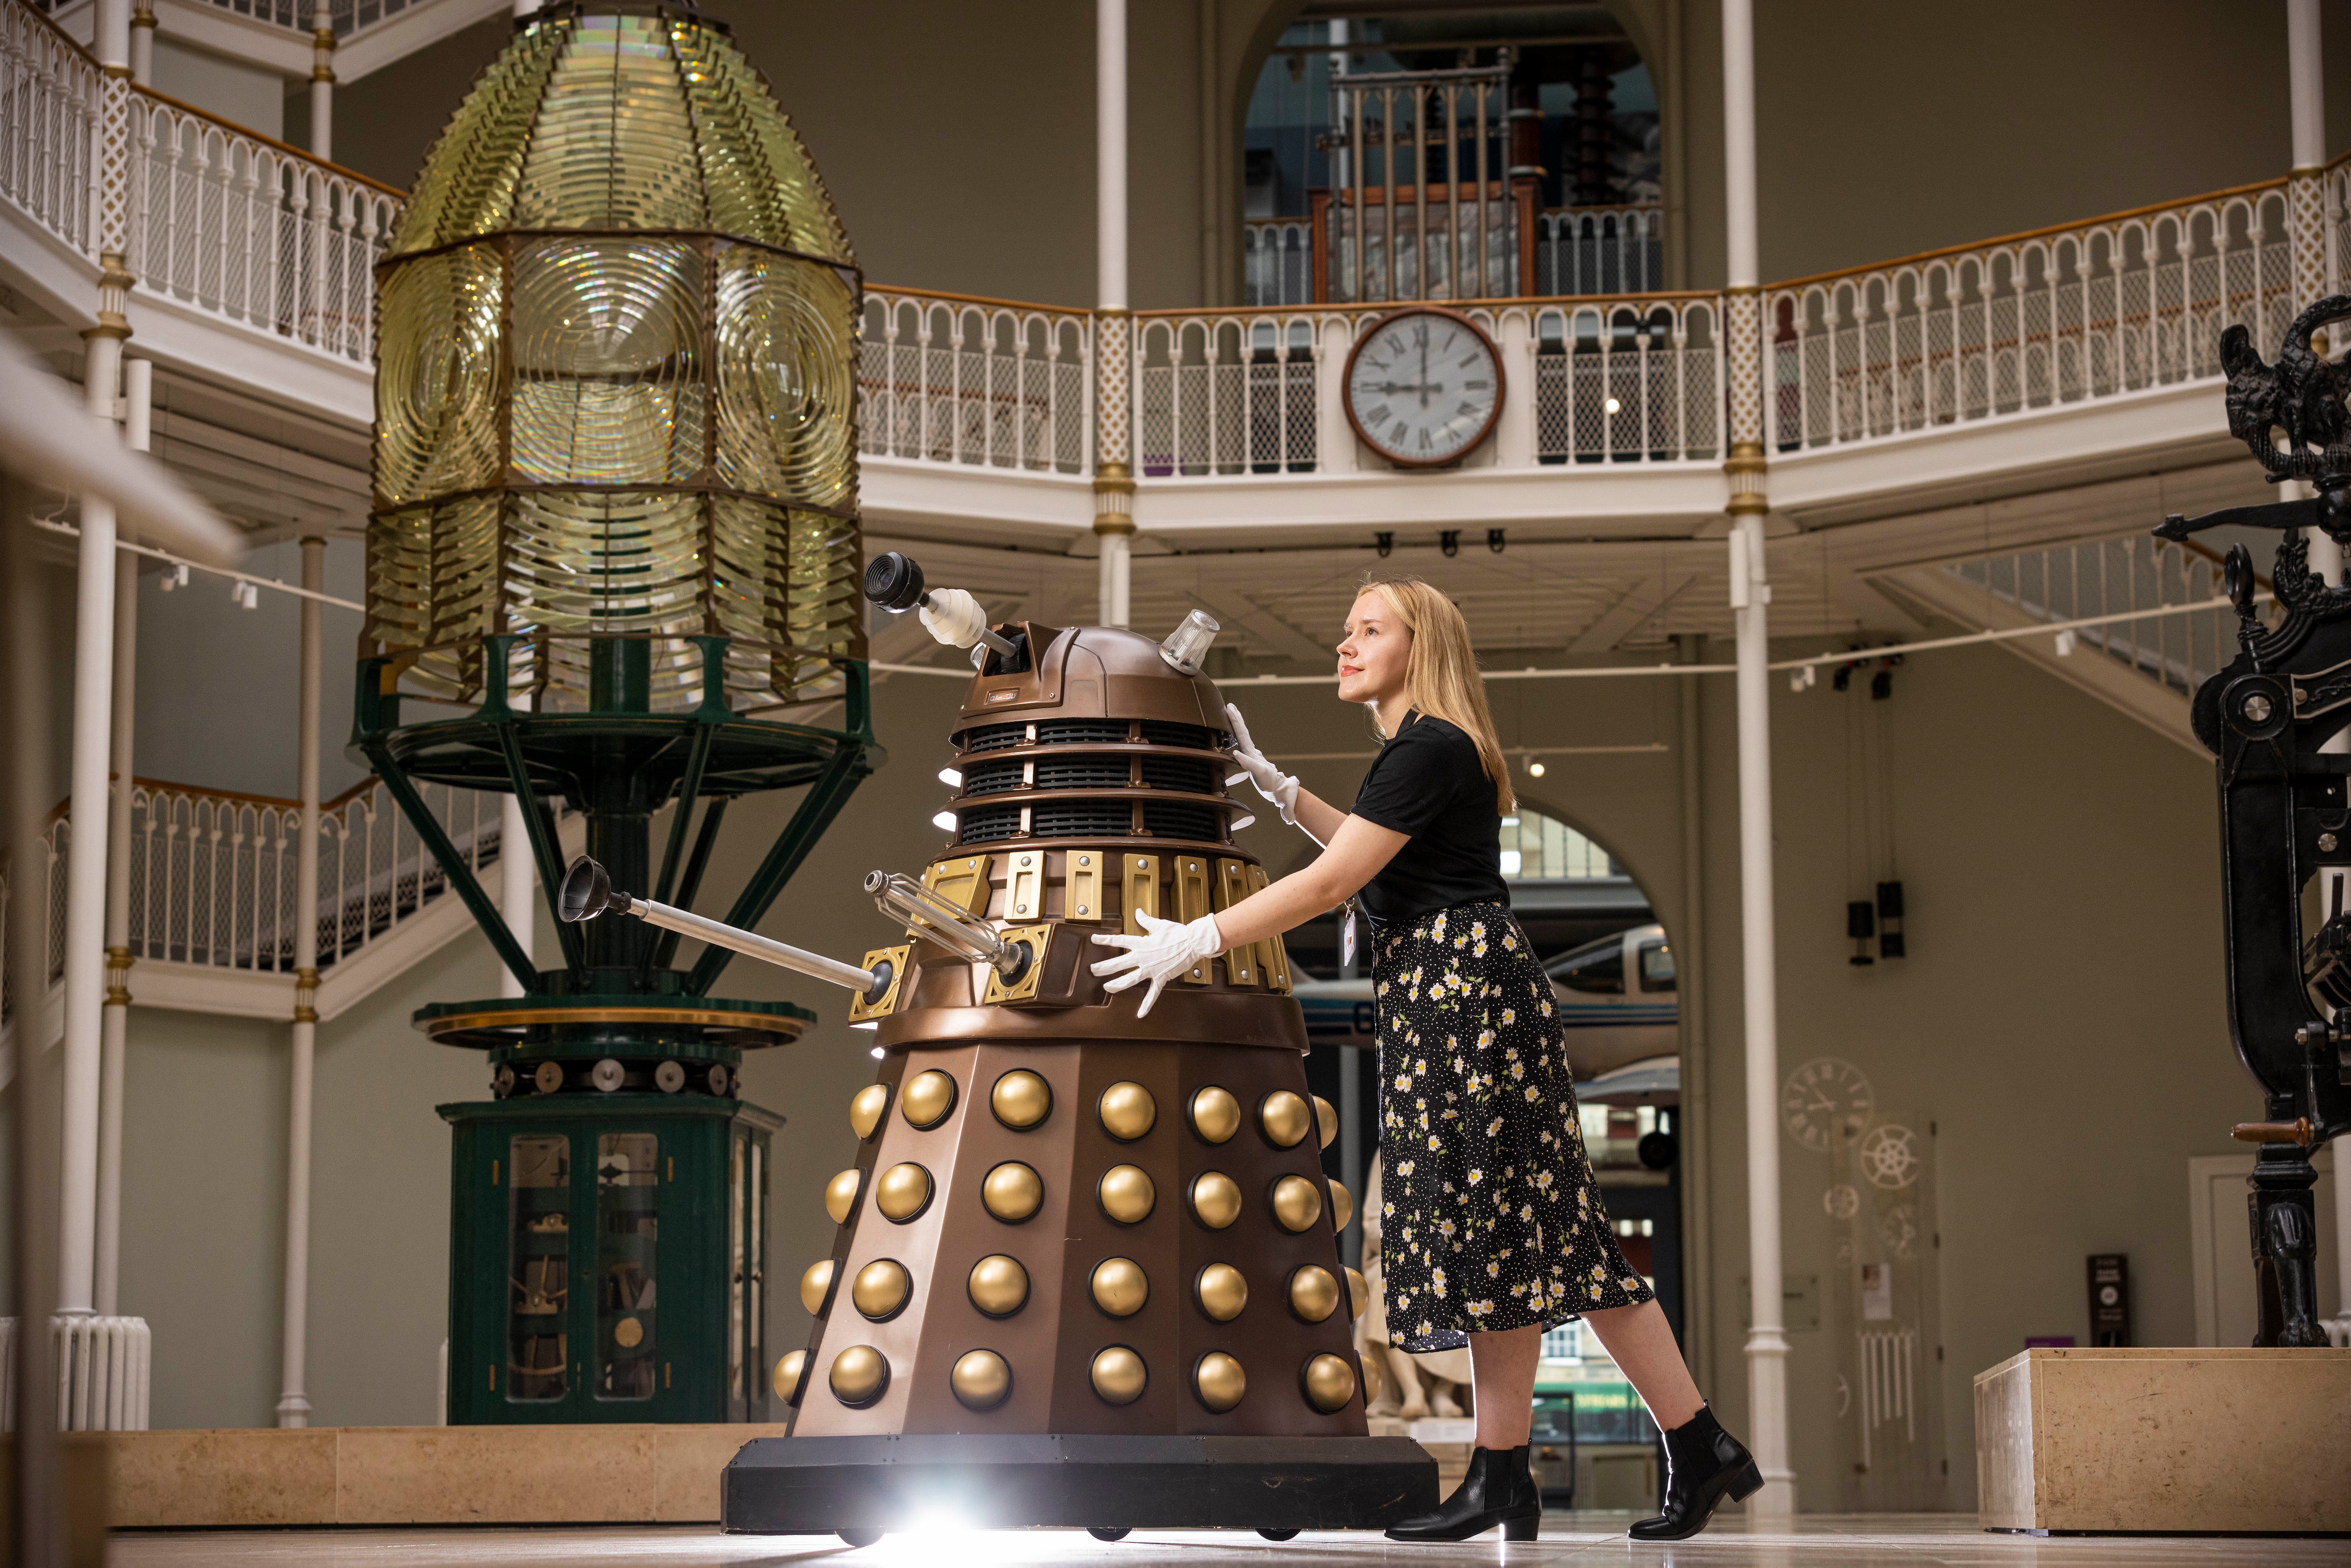 A Dalek arrives at the National Museum of Scotland